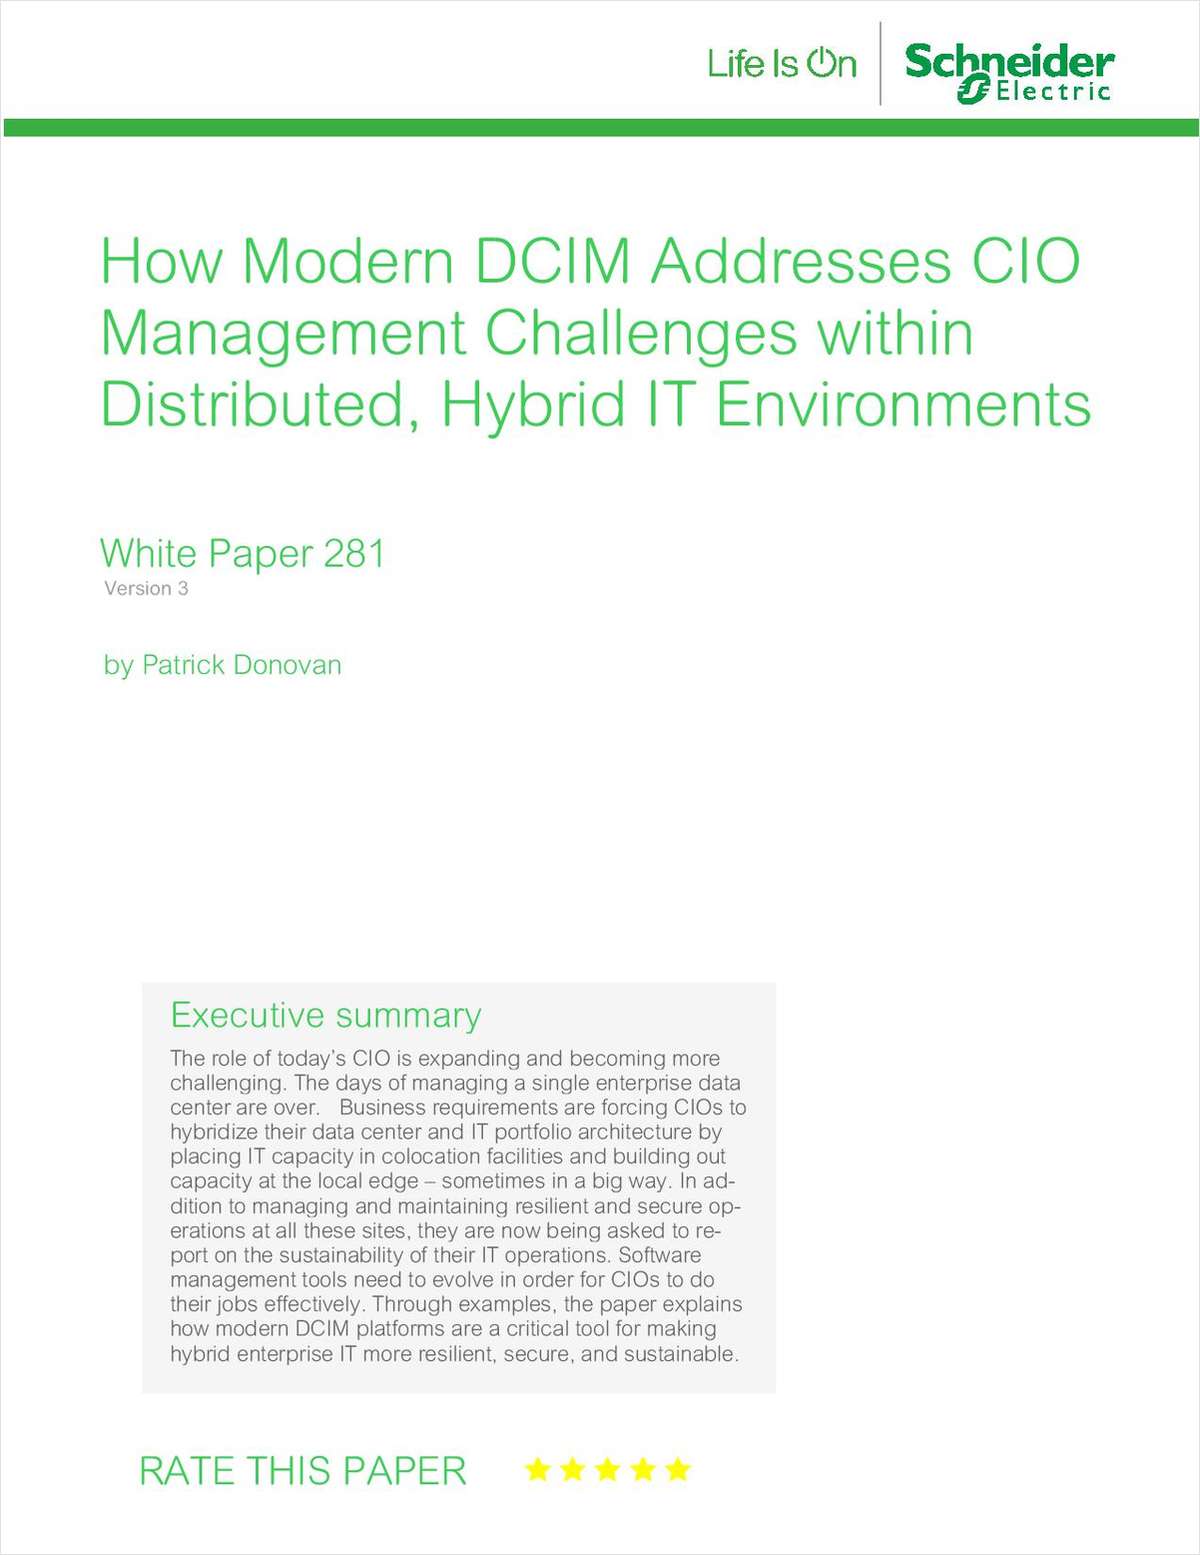 How Modern DCIM Addresses CIO Management Challenges within Distributed Hybrid IT Environments